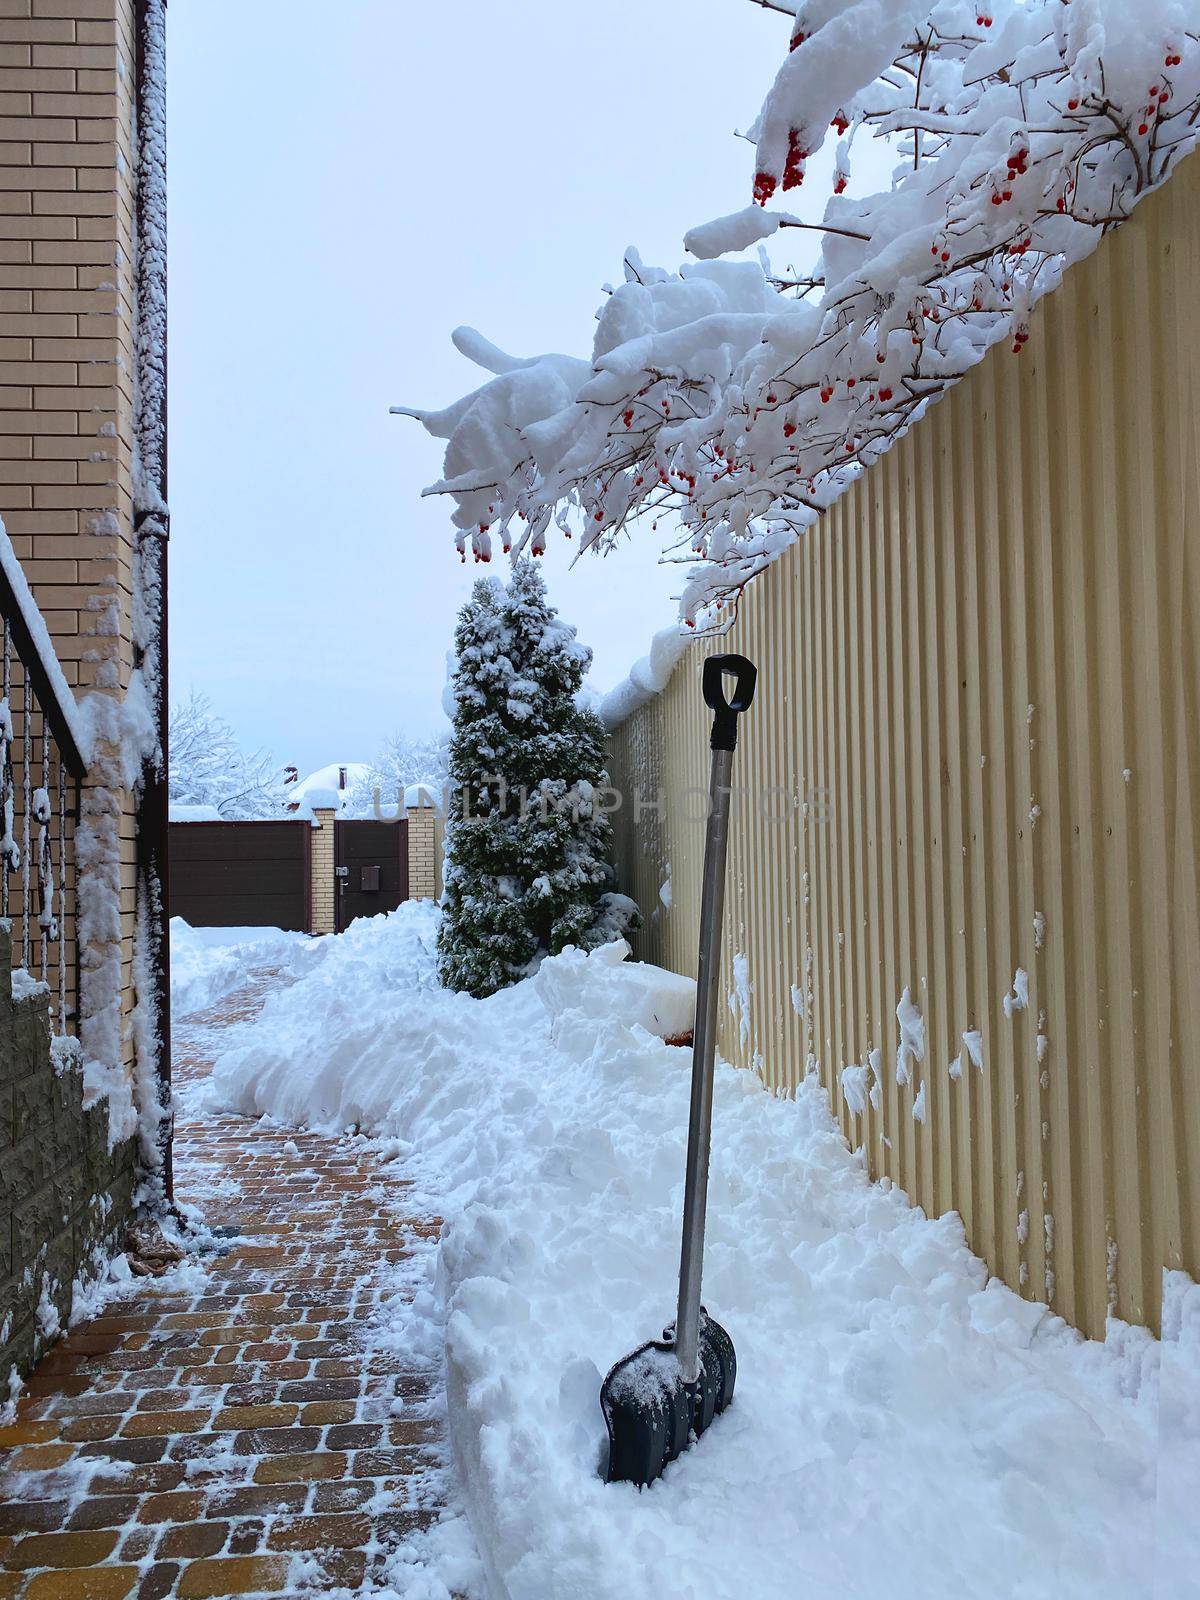 Shoveling Snow from the sidewalk in the courtyard of the house: a shovel in a snowdrift